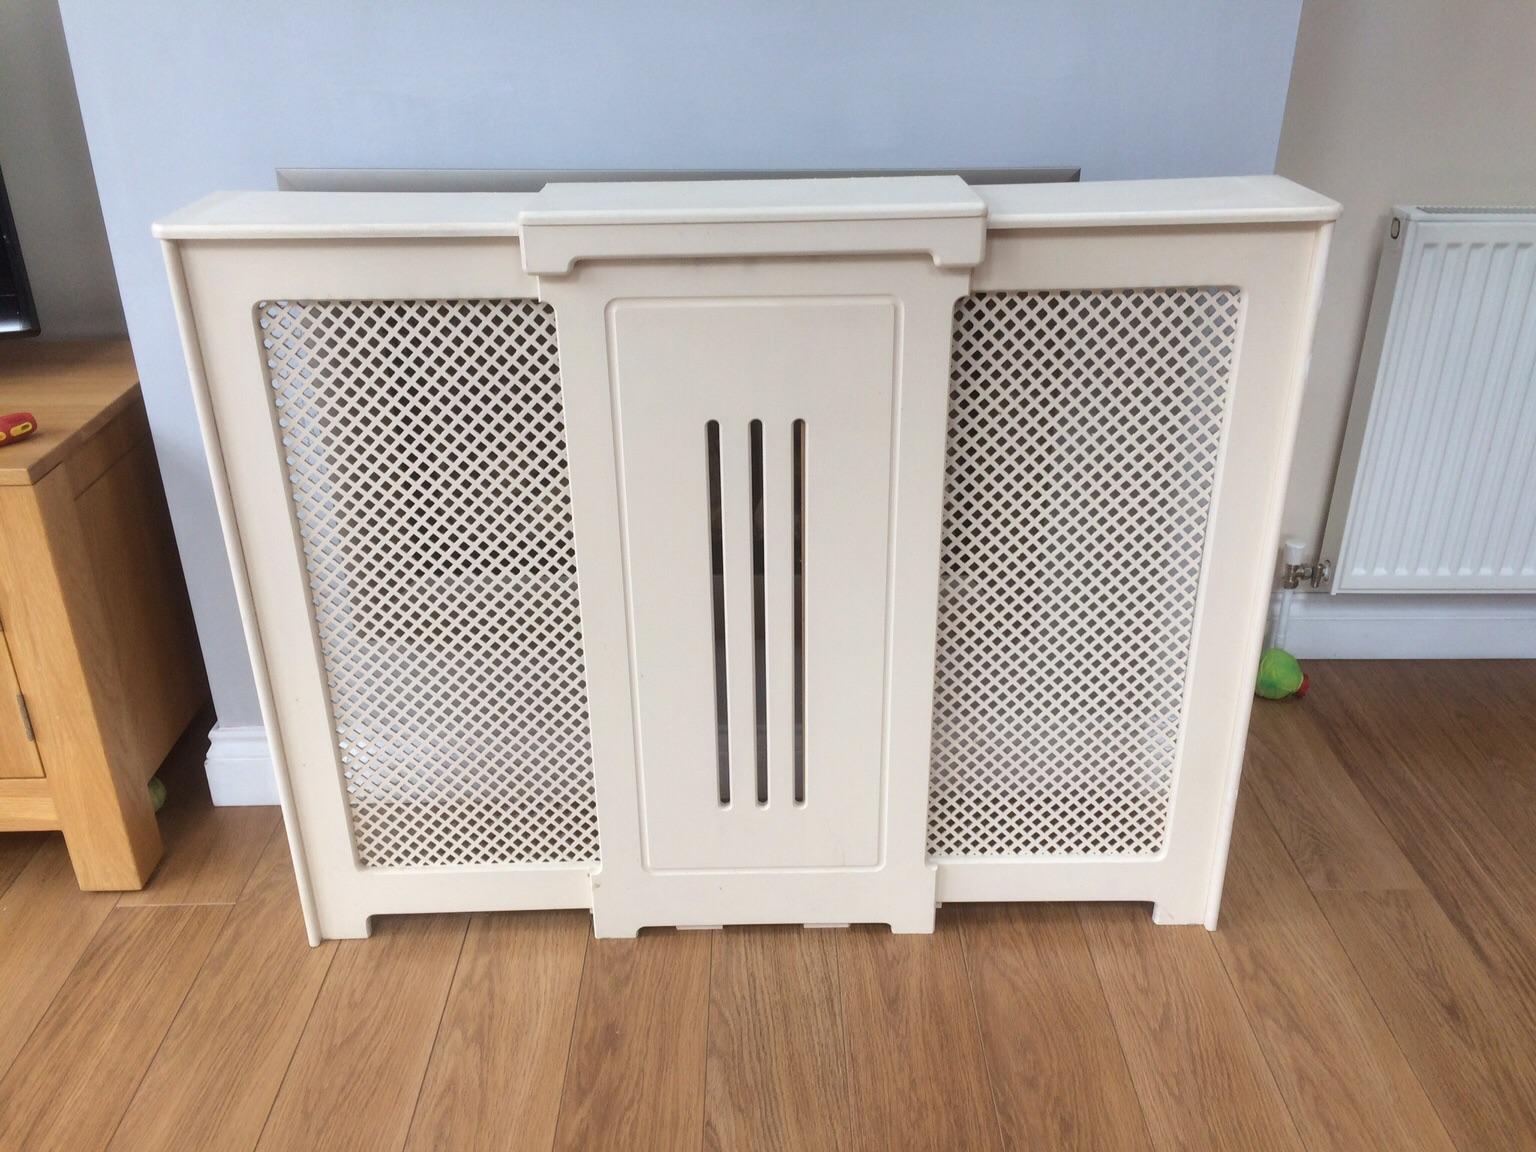 Mdf Radiator Cover And Bookcase In Sa5, Mdf Radiator Covers With Bookcase